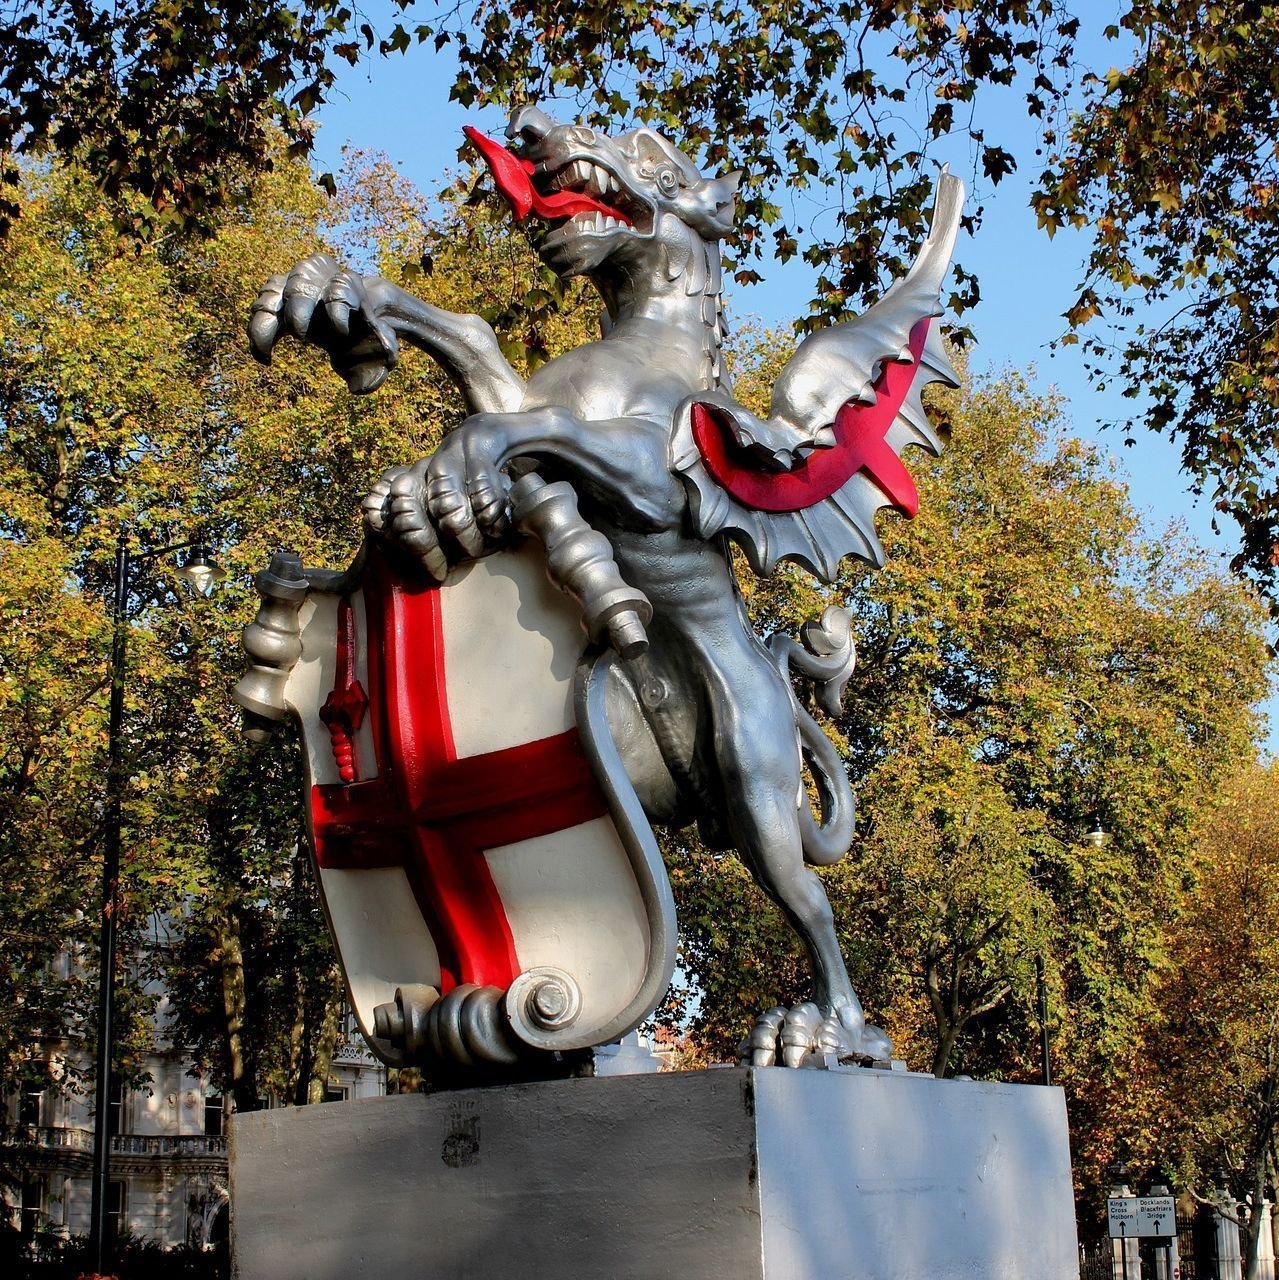 St George's Day today, 23rd April. 
St George, the patron saint of England, never actually set foot in England, but was revered for his legendary bravery and adopted as our patron saint under Henry VIII. 
The story of the dragon is that St George rod